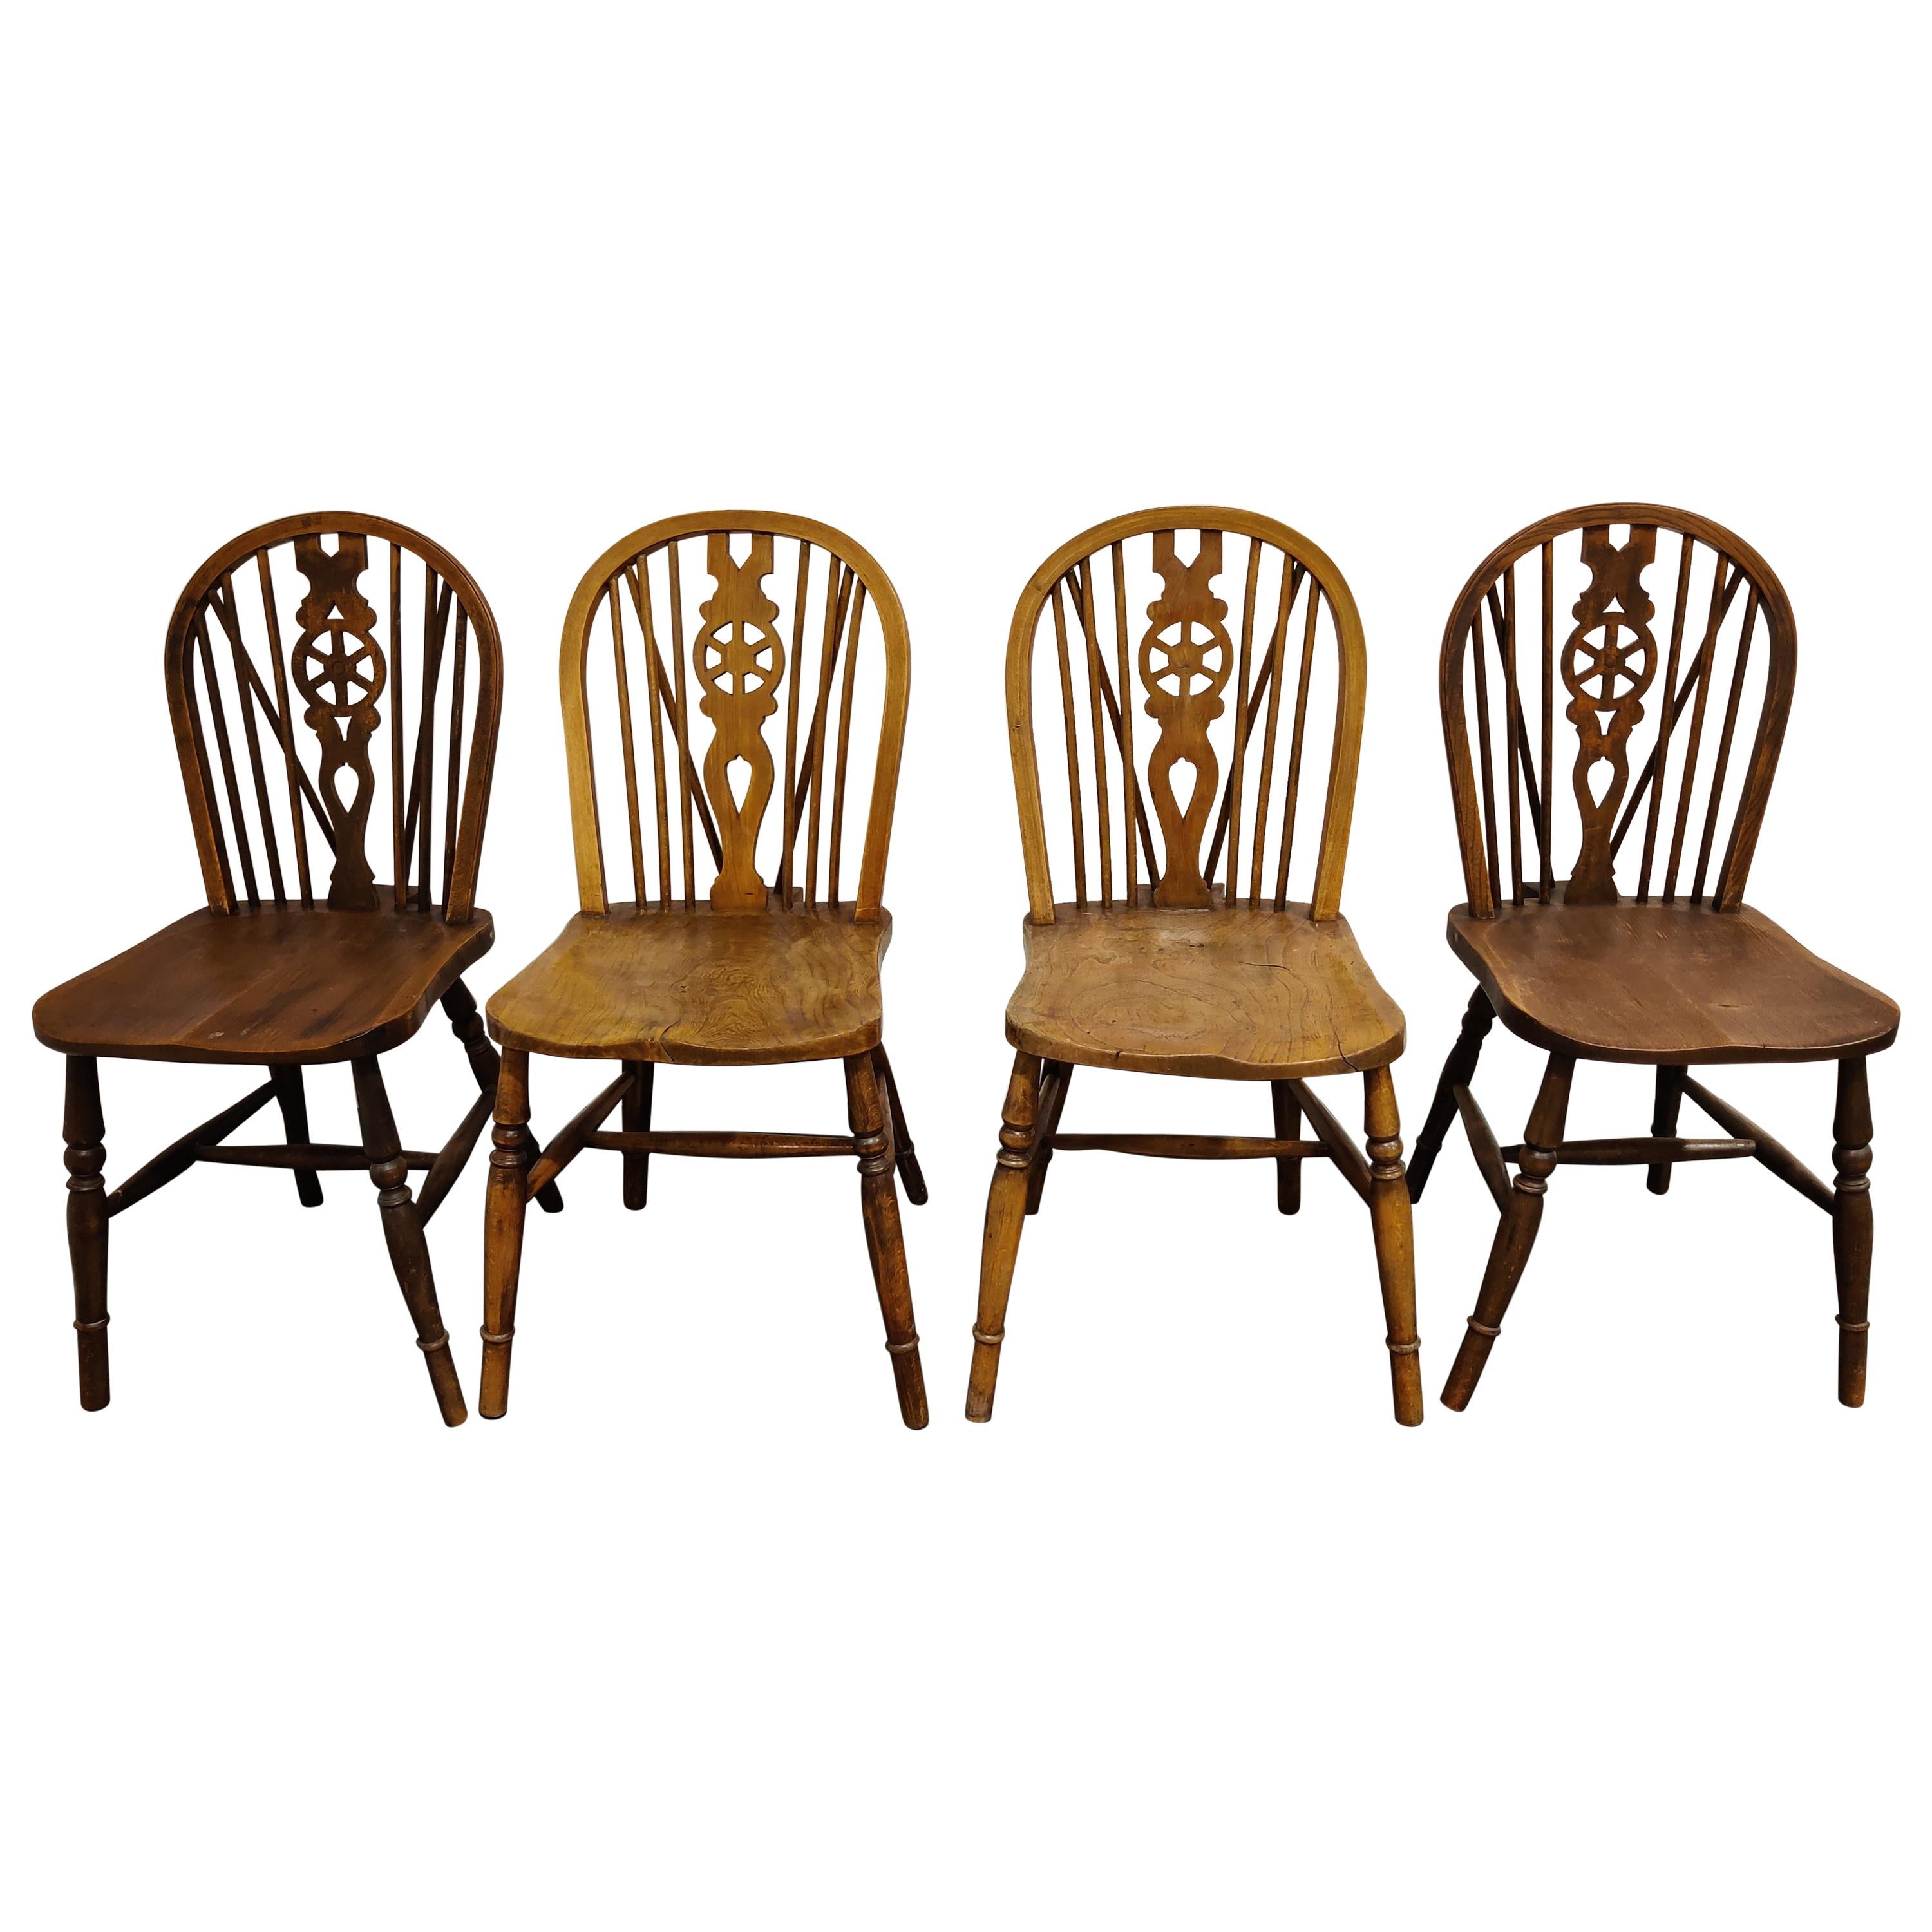 Set of 4 Vintage Ercol Dining Chairs, 1950s